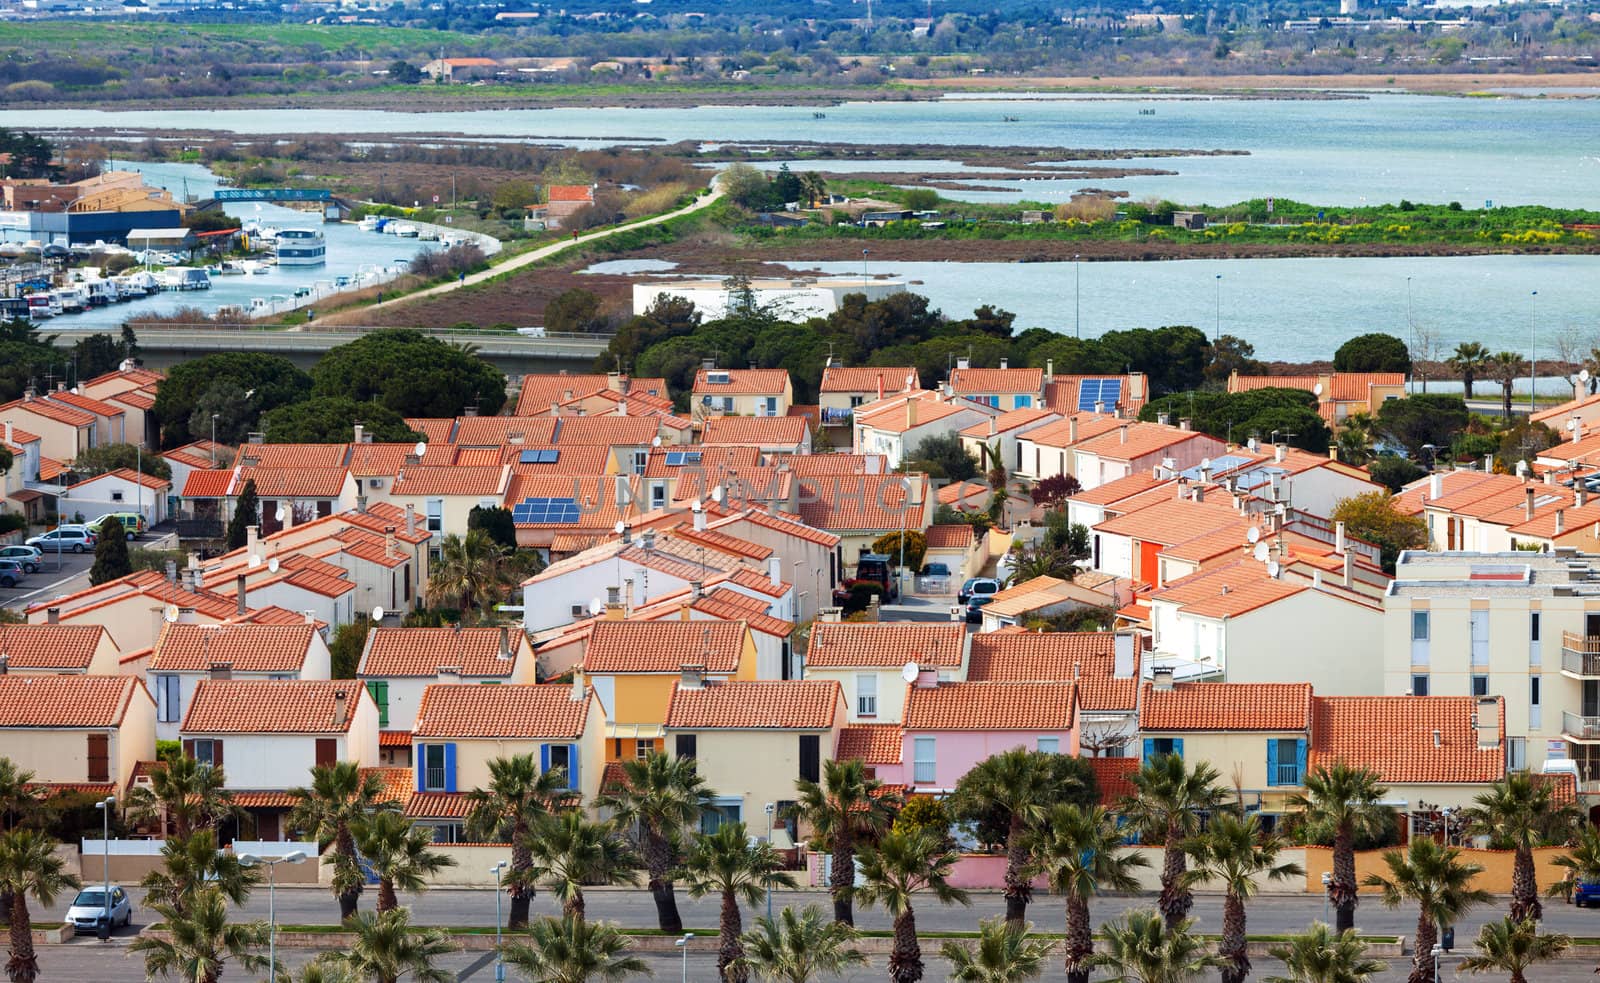 View of the gated community on the shore of the sea by Discovod